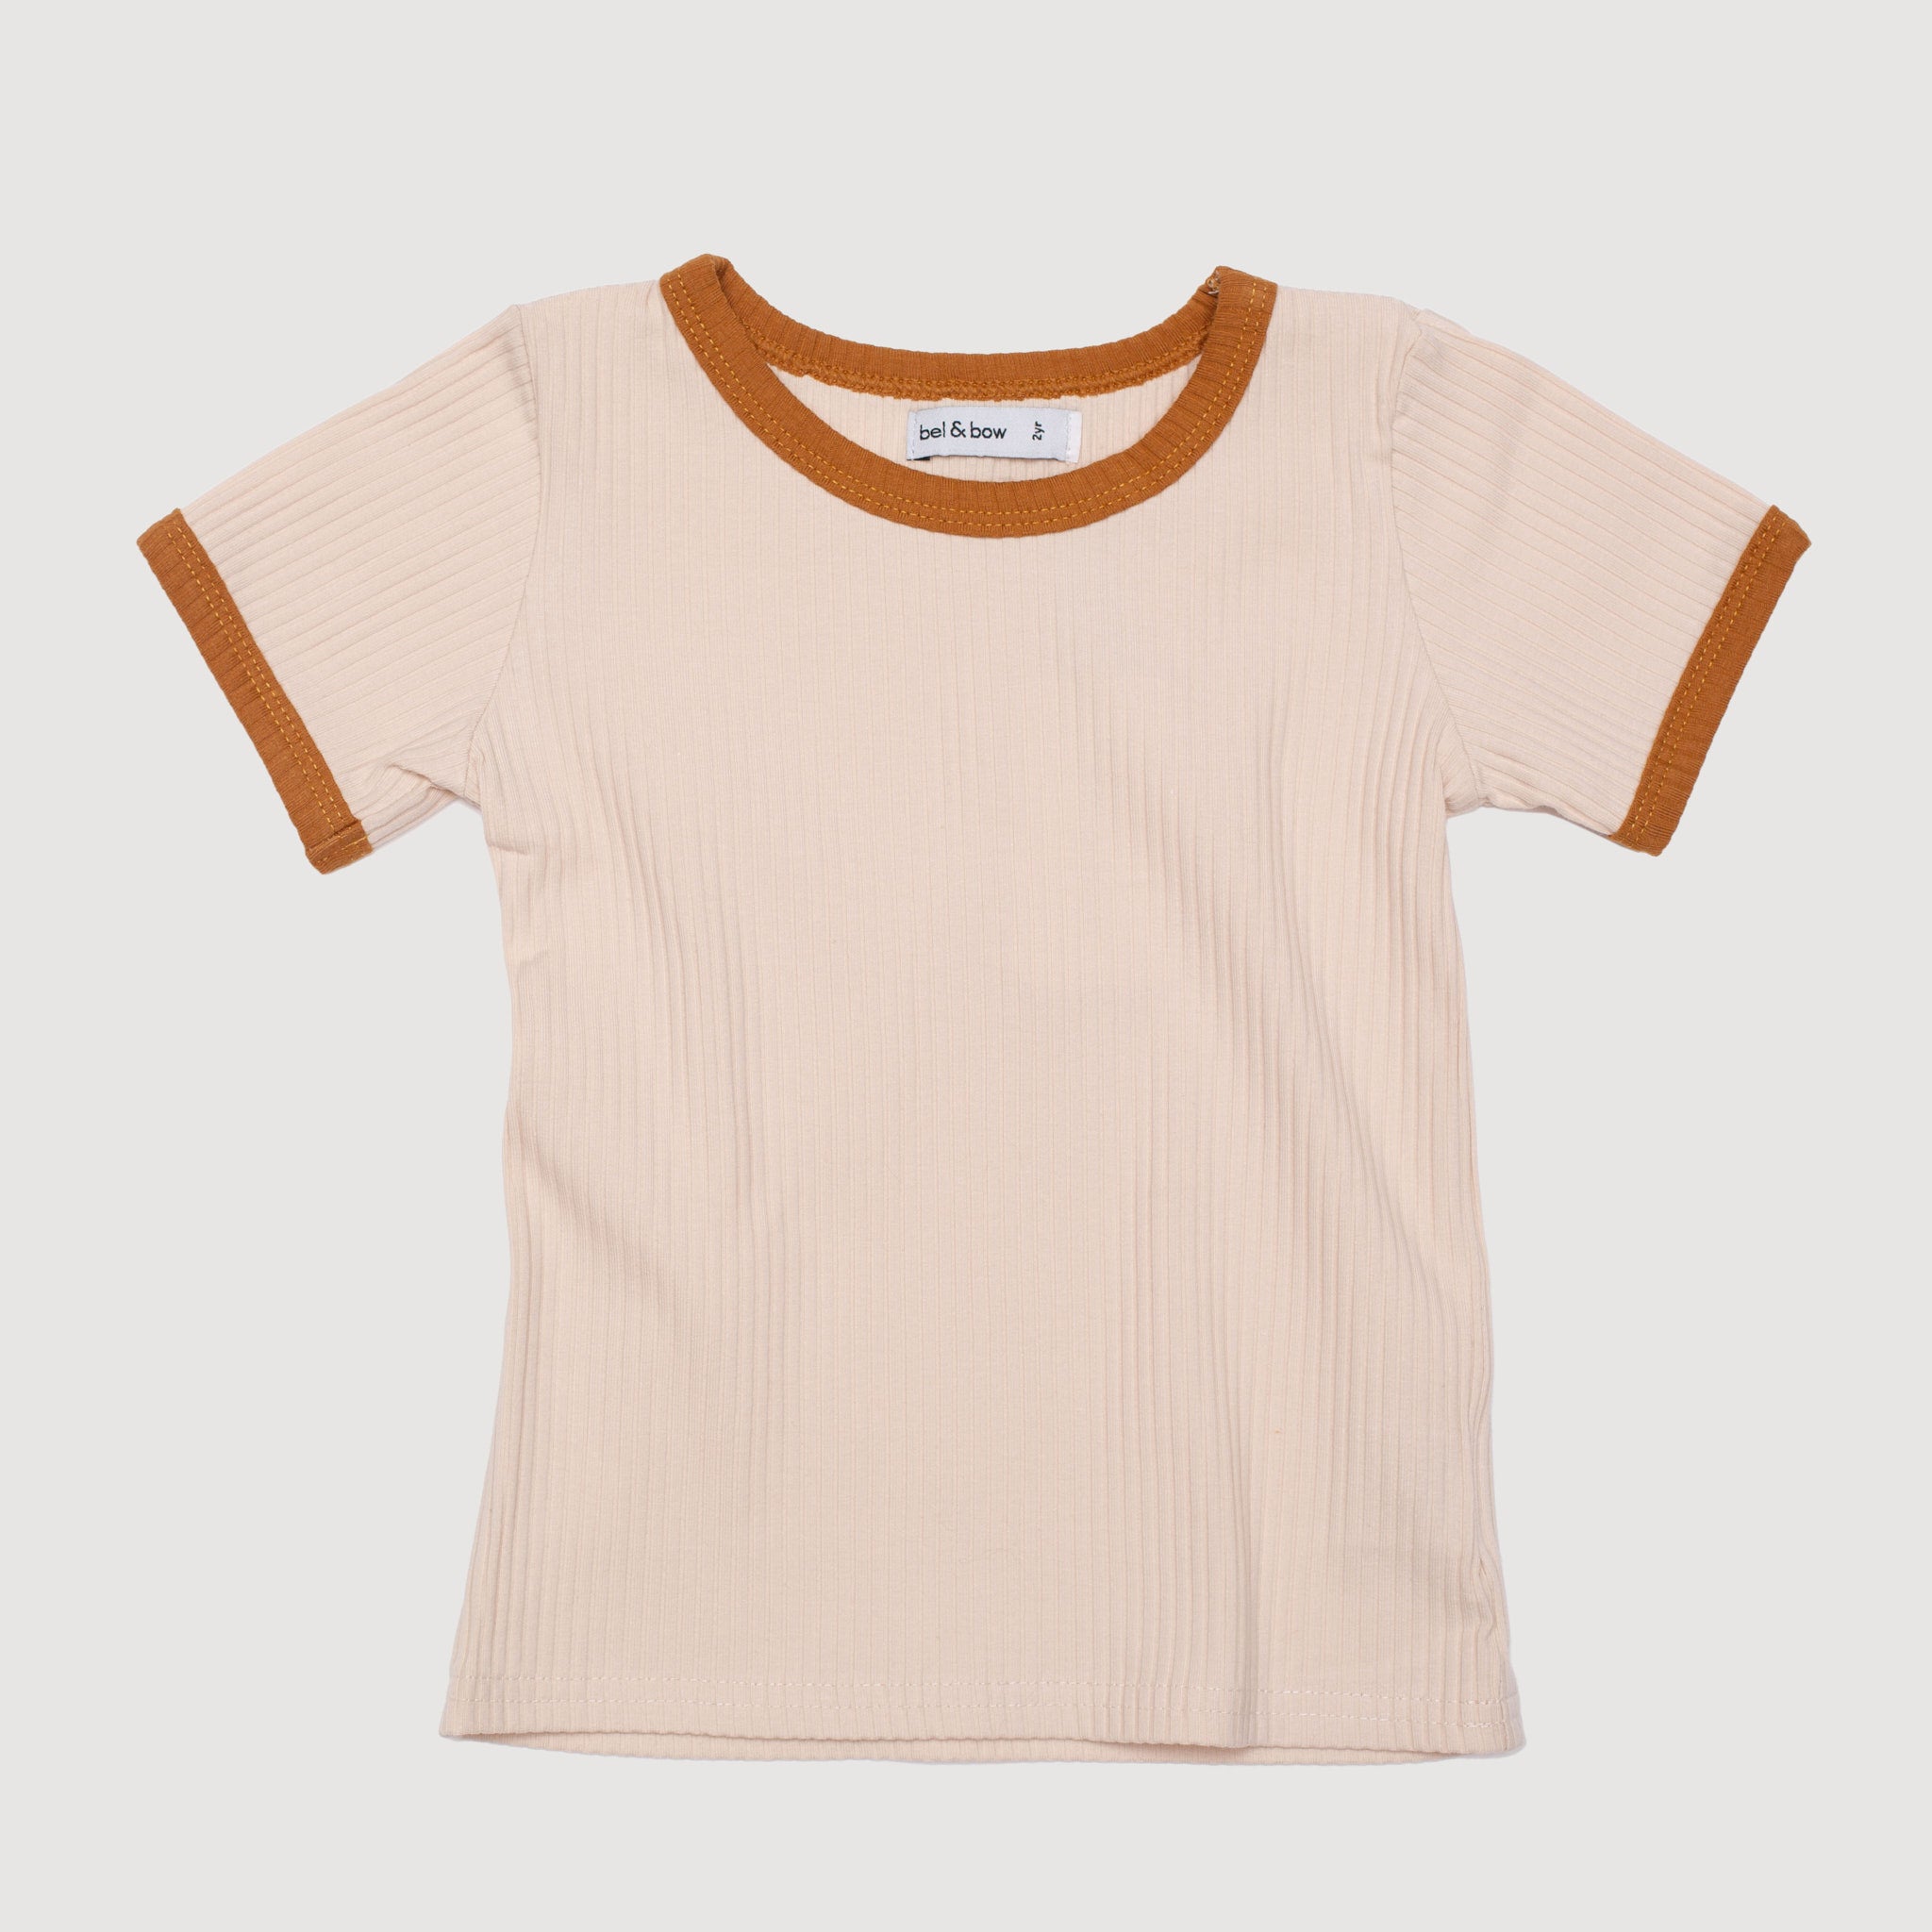 Retro Ringer Ribbed Tee - Oatmeal with Mustard Binds bel & bow